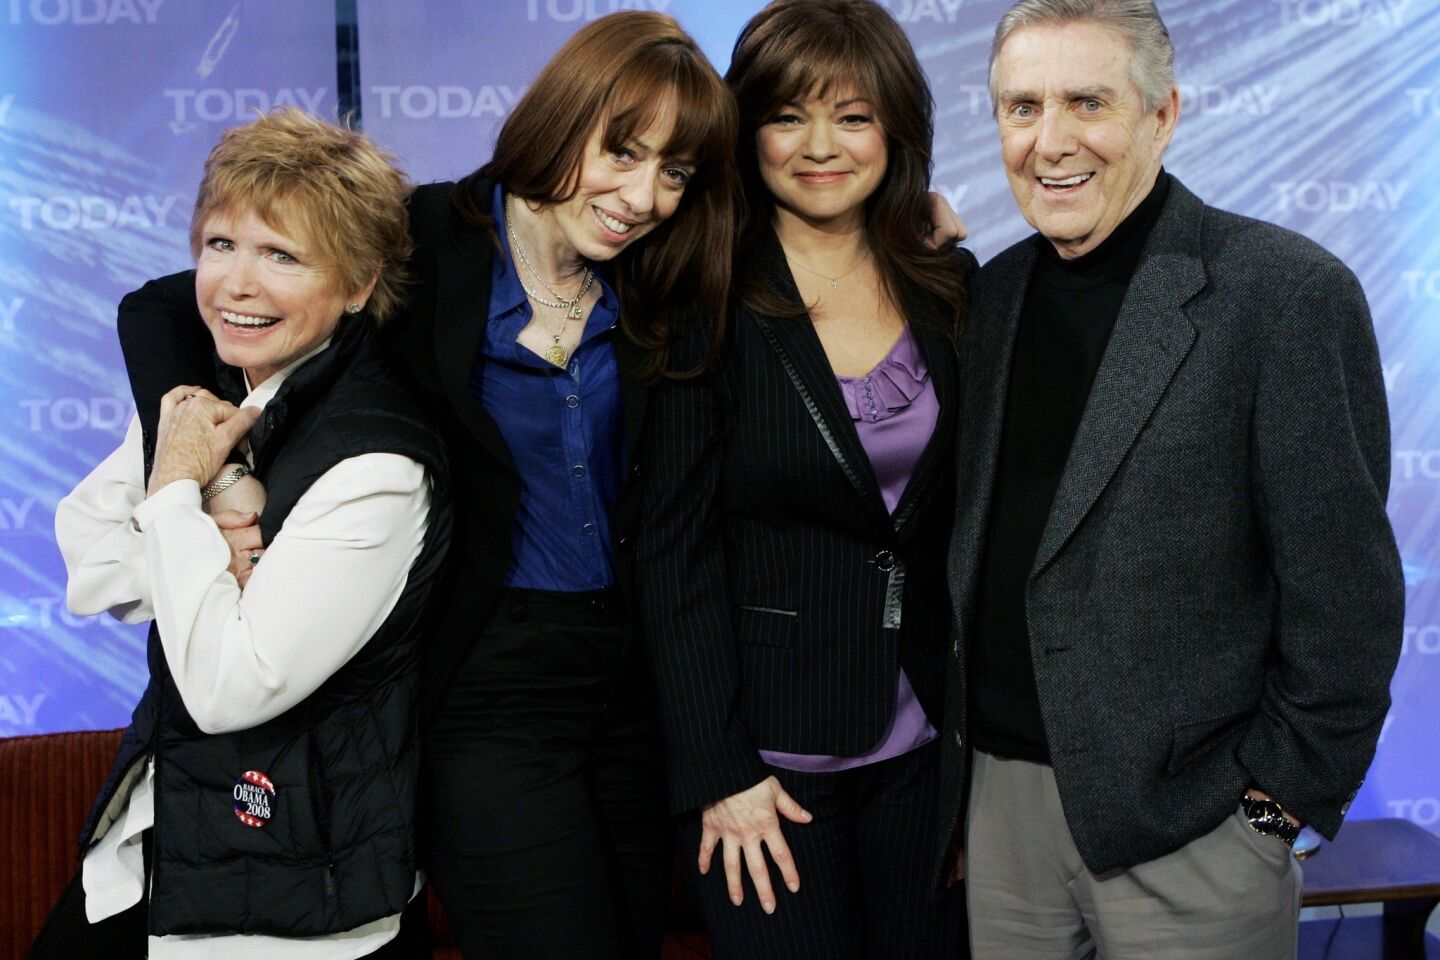 'One Day at a Time' reunion